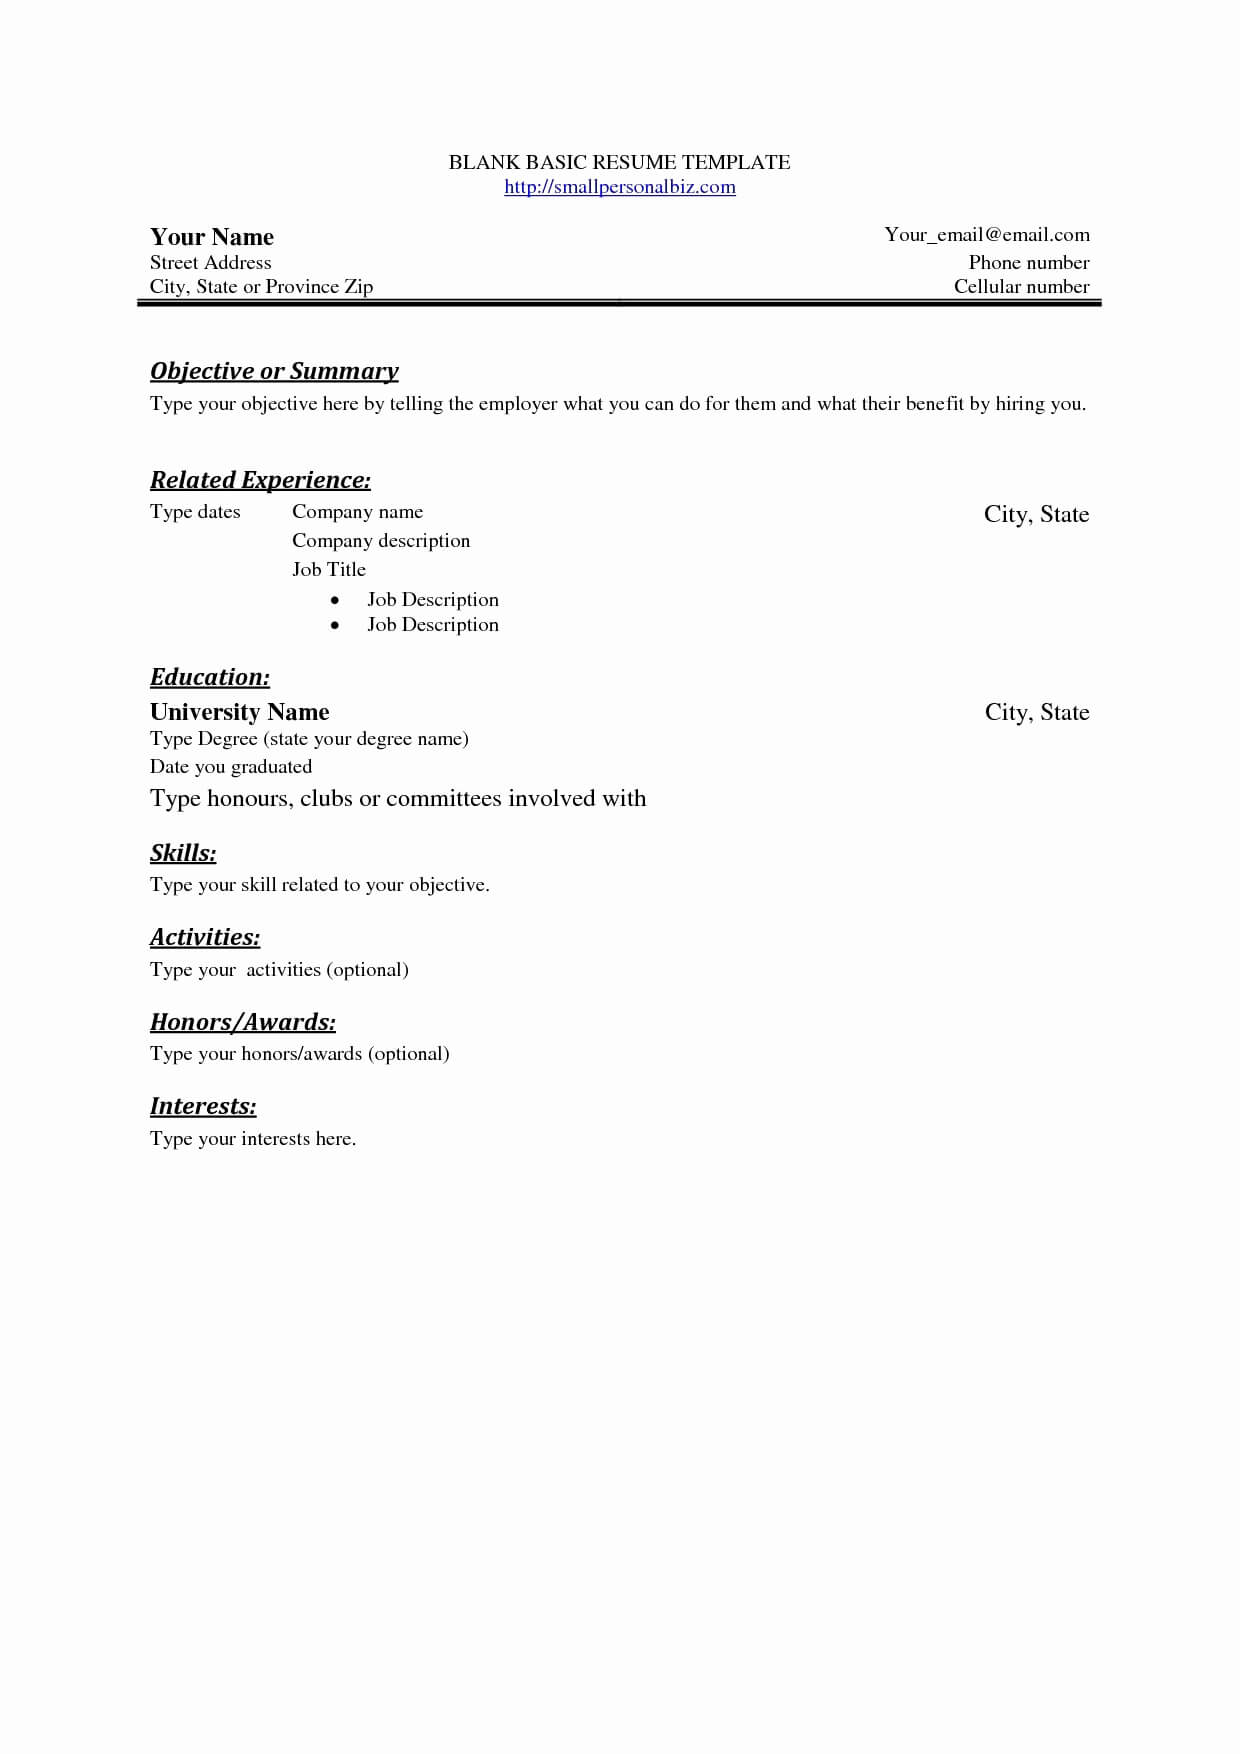 Easy Resume Template Free Cover Letter Templates Throughout Free Blank Resume Templates For Microsoft Word